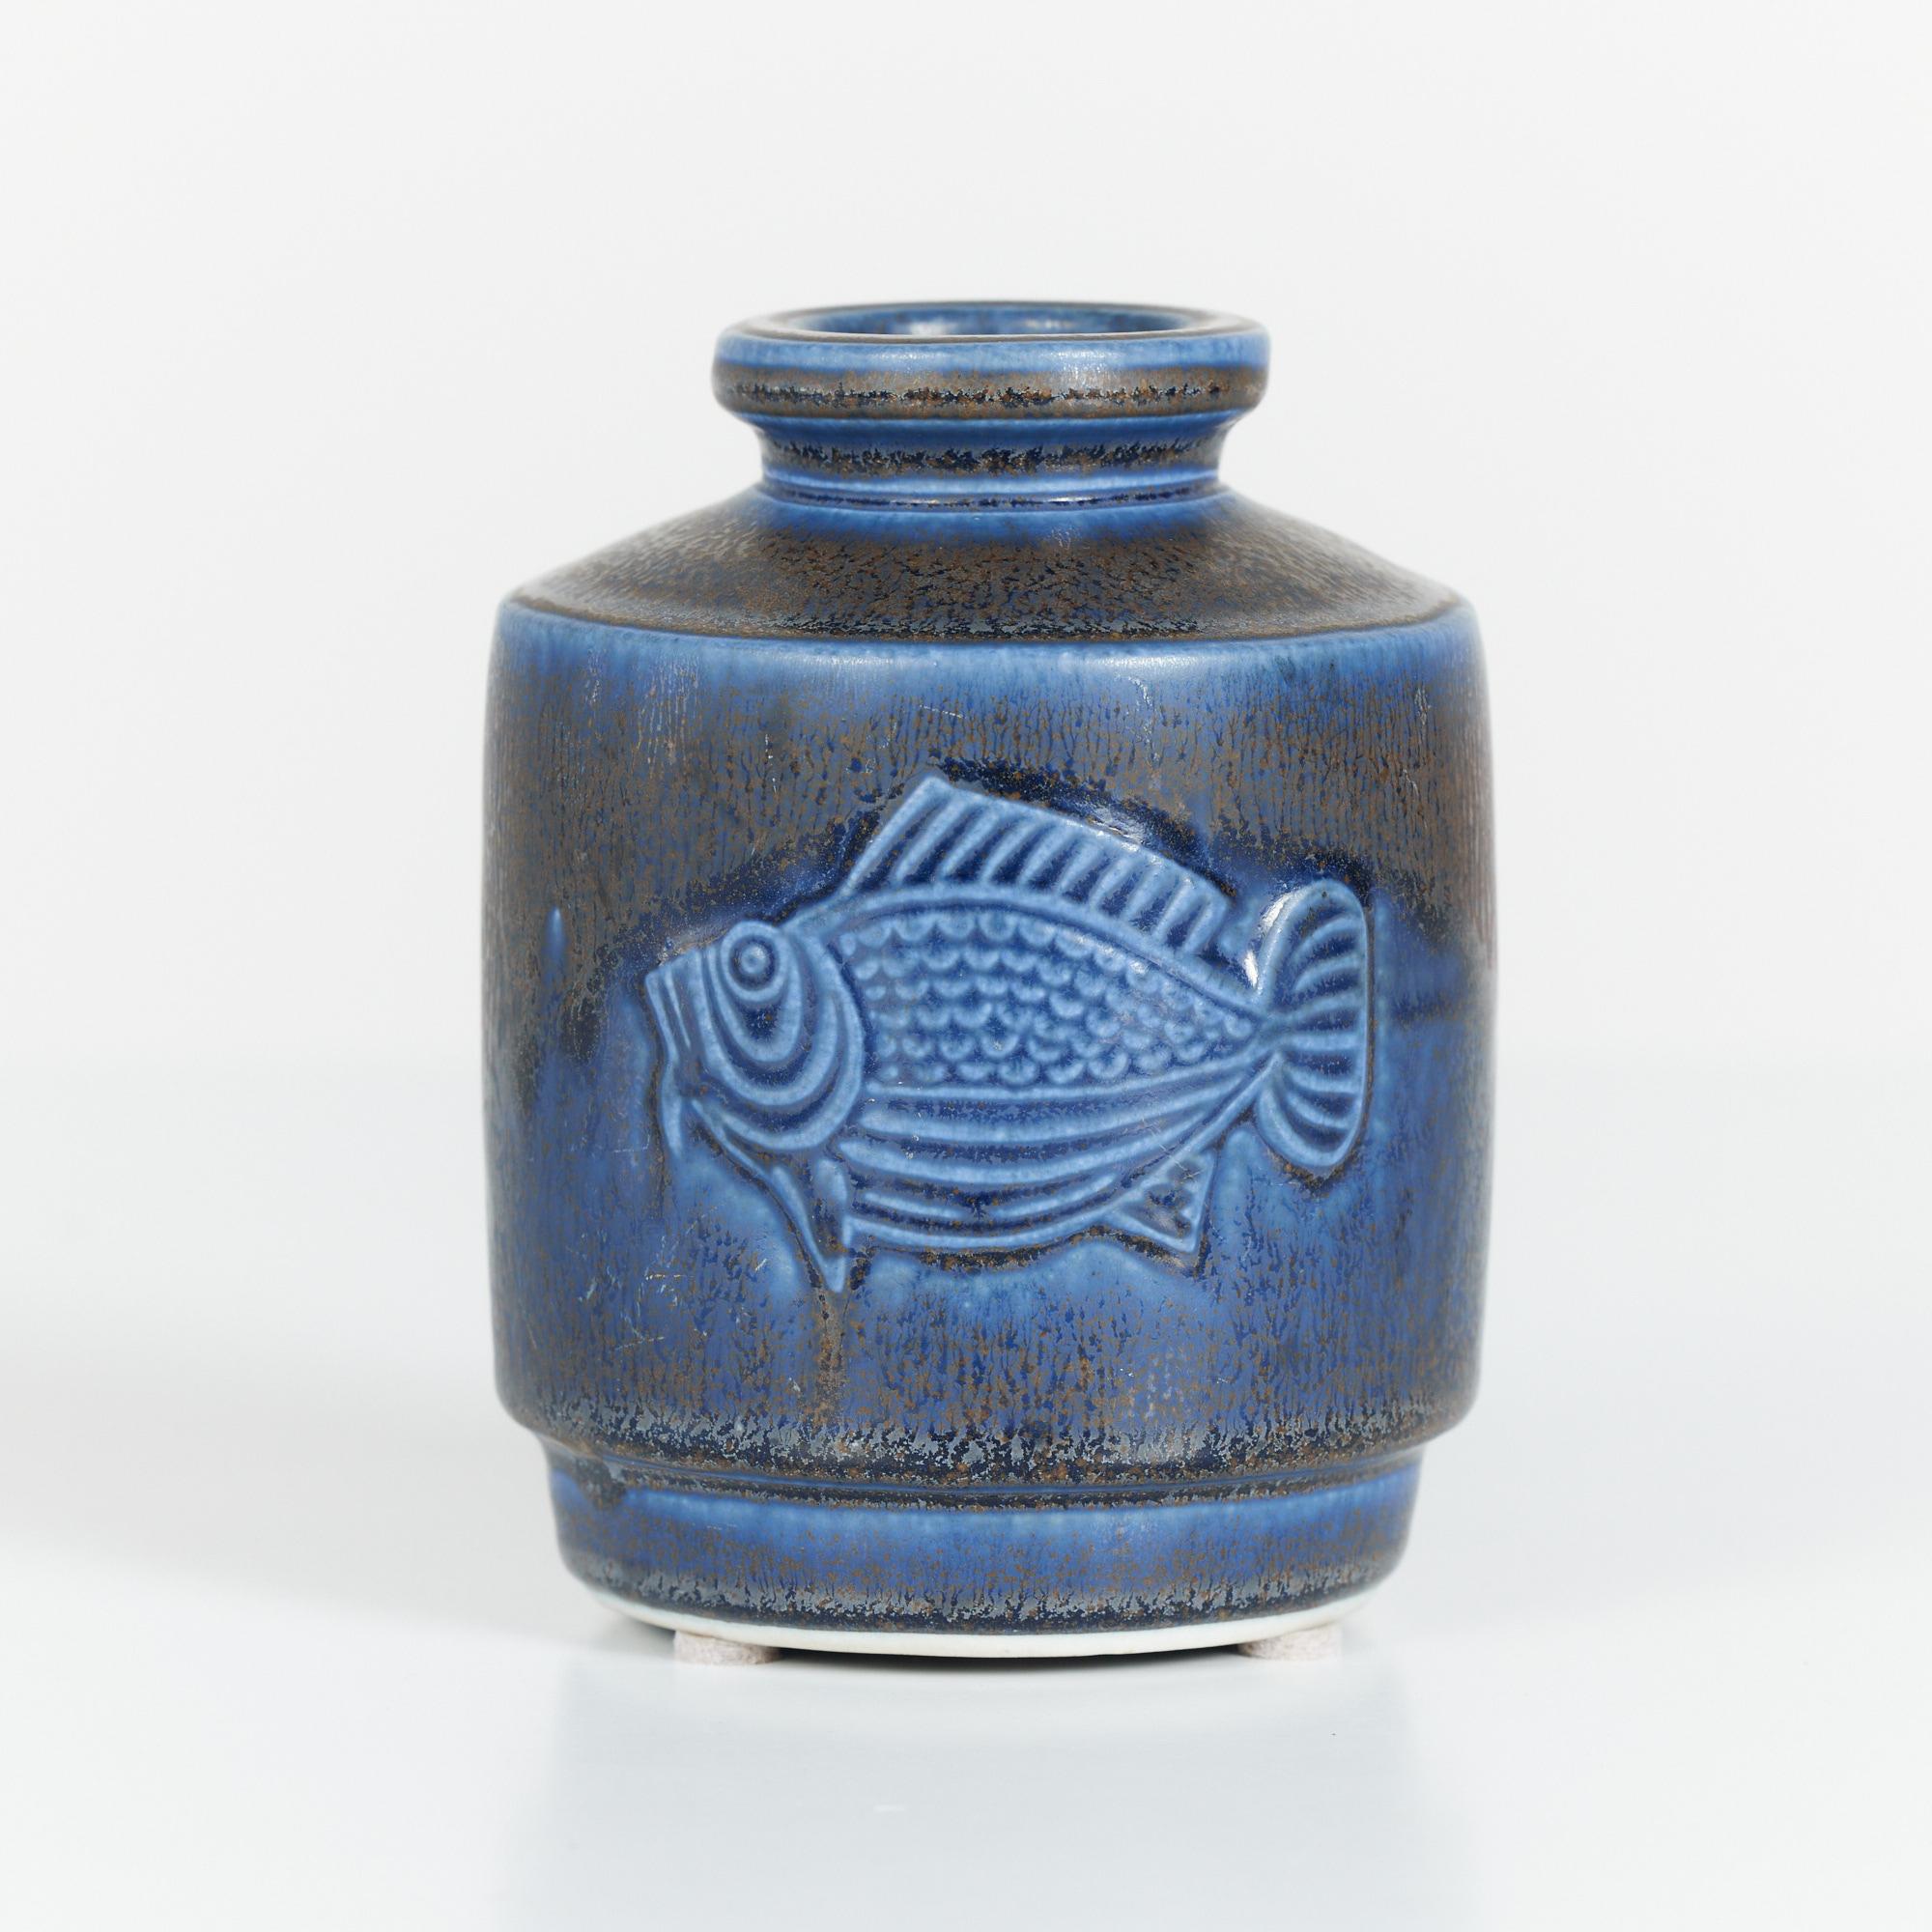 Blue glazed vessel by Wilhelm Kåge for Gustavsberg Studio c.1950s, Sweden. This vessel features a spout mouth opening and all over blue glaze and fish motif.

Impressed KAPA KAGE VERKSTAD - Sweden - Gustavsberg

Dimensions
3.5” diameter x 5”